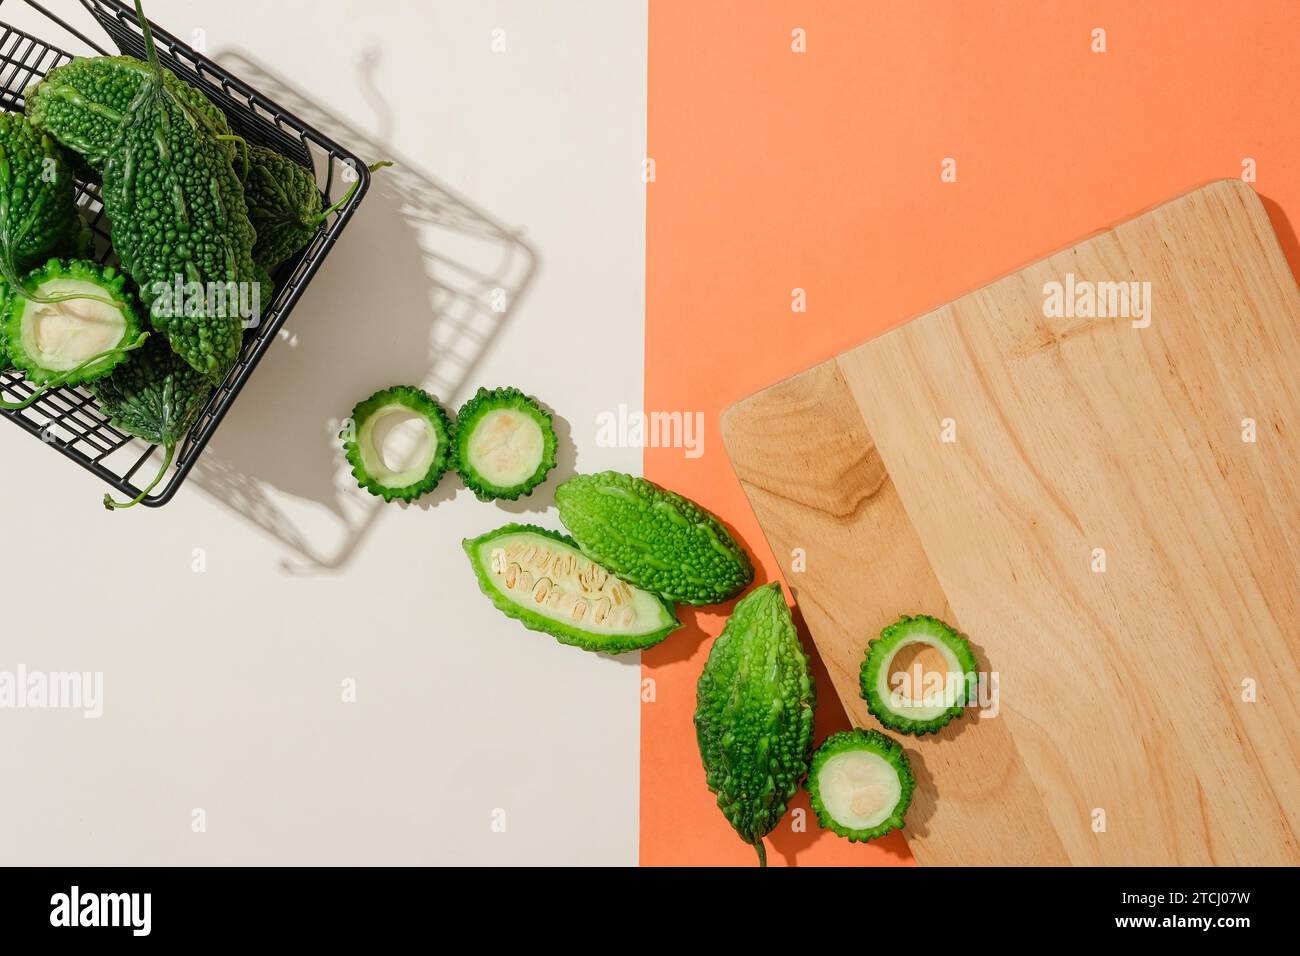 The background is divided into two halves with two colors red and white. Bitter melon is stored in an iron mesh basket and a wooden cutting board is d Stock Photo